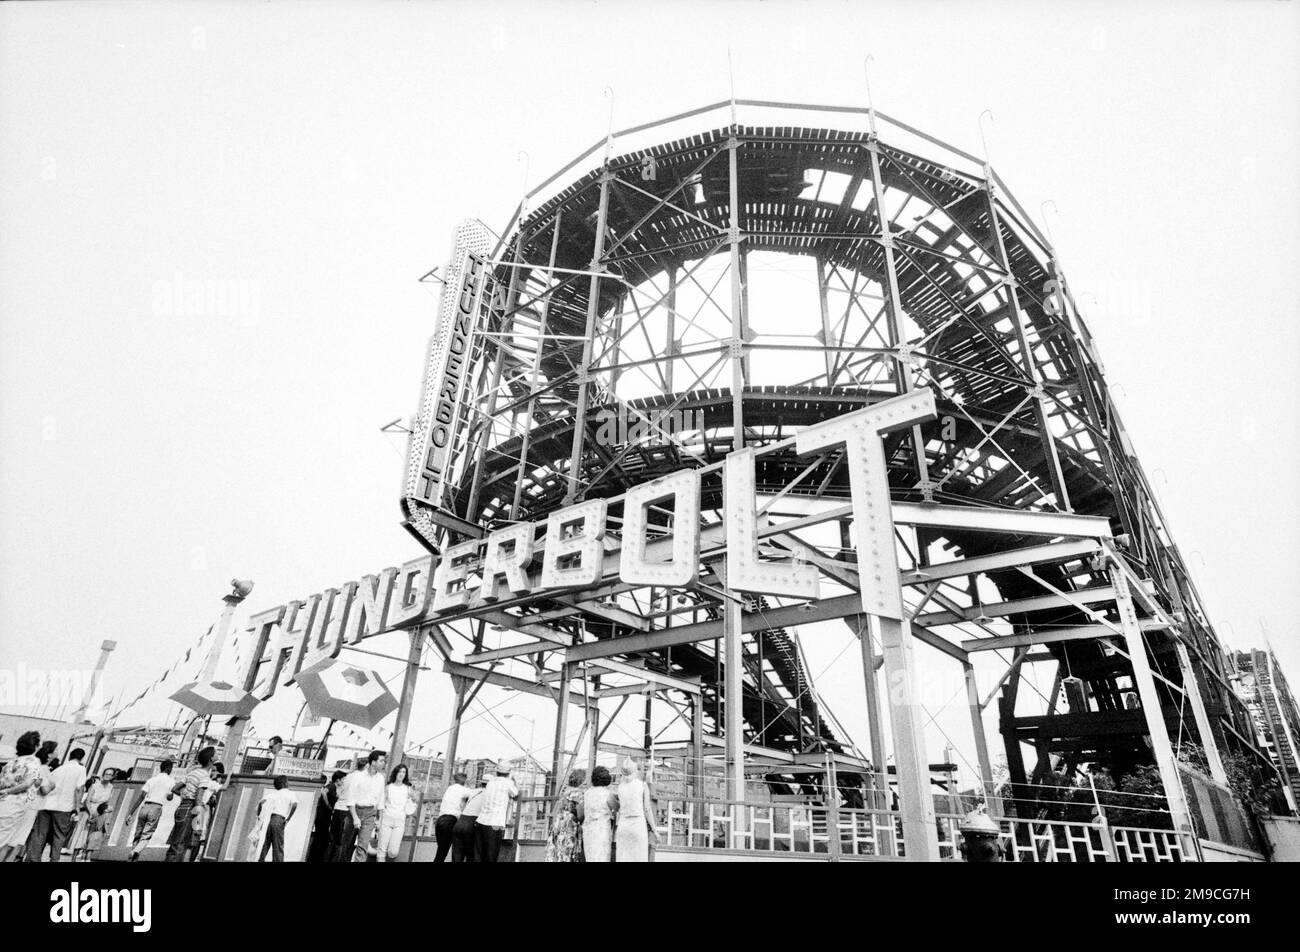 Thunderbolt Roller Coaster, Coney Island, Brooklyn, New York, États-Unis, Angelo Rizzuto, Collection Anthony Angel, août 1964 Banque D'Images